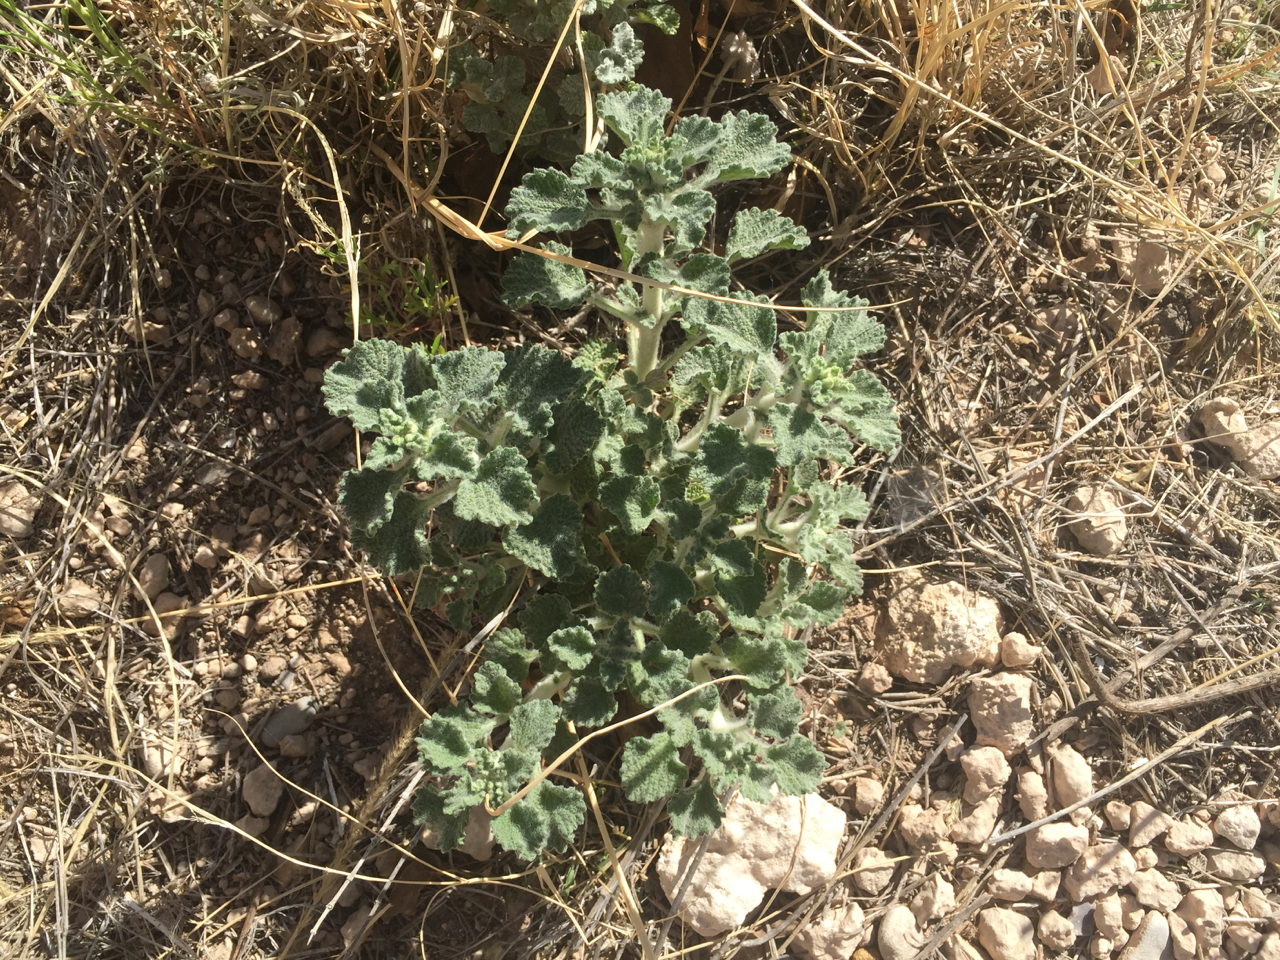 Bushy clump of horehound early in the season before flowering